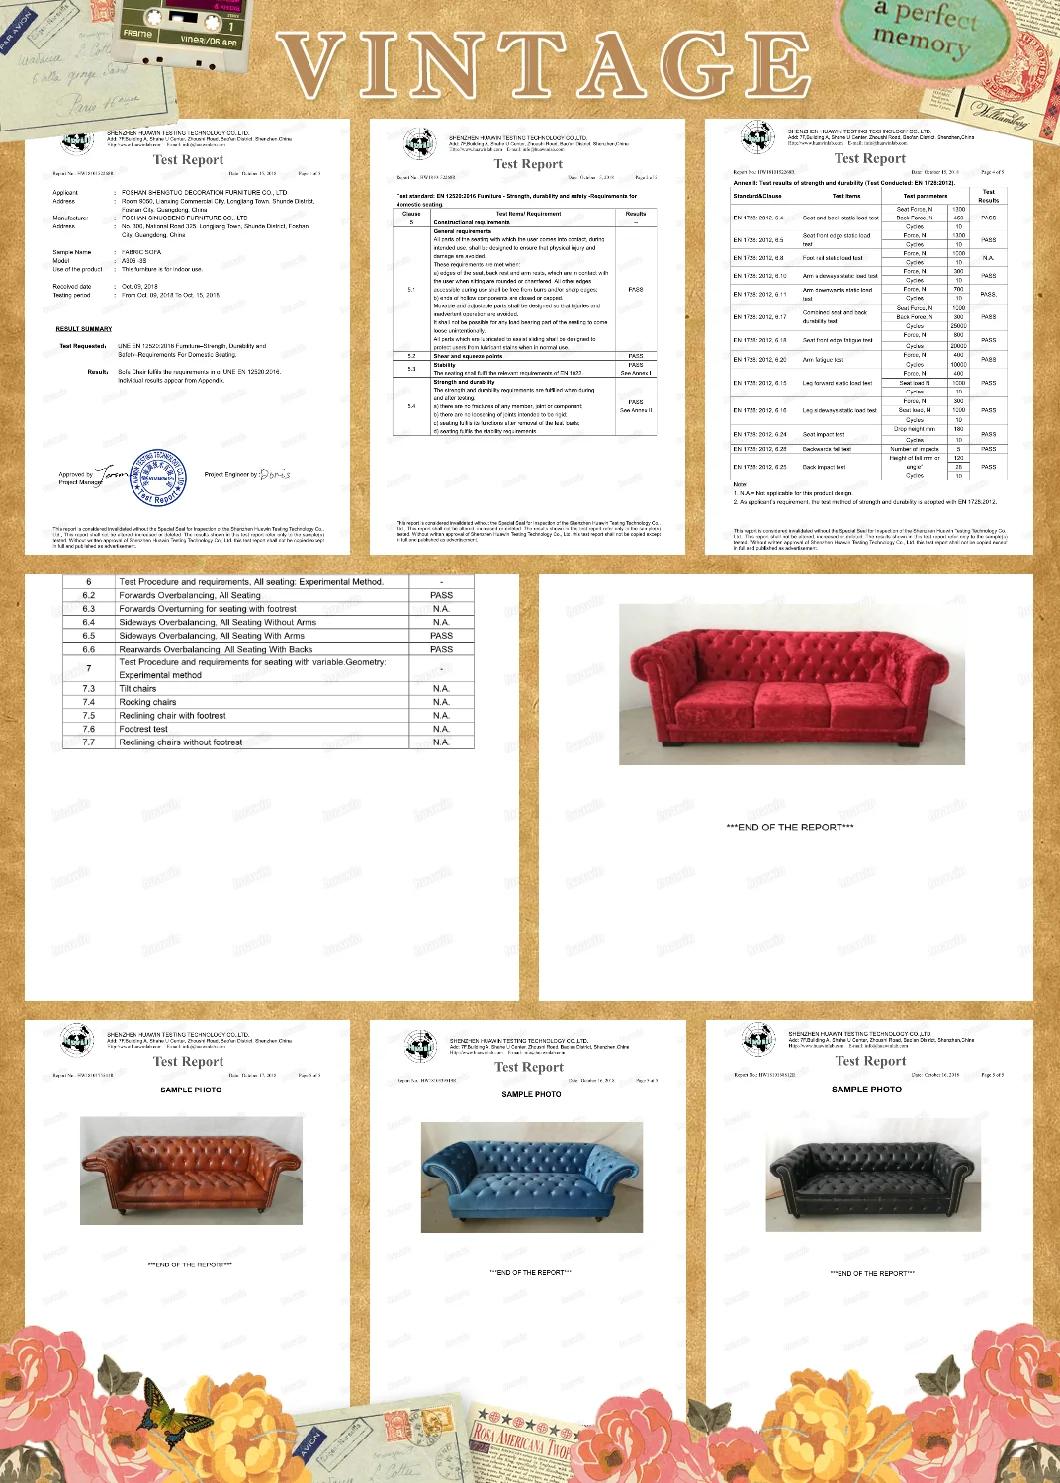 Latest Luxury Design Living Room Sofa Italian Europe Classical Vintage Upholstery Tufted Chesterfield Sectional 3 Seaters Button Cheap Velvet Antiqe Lounge Sofa